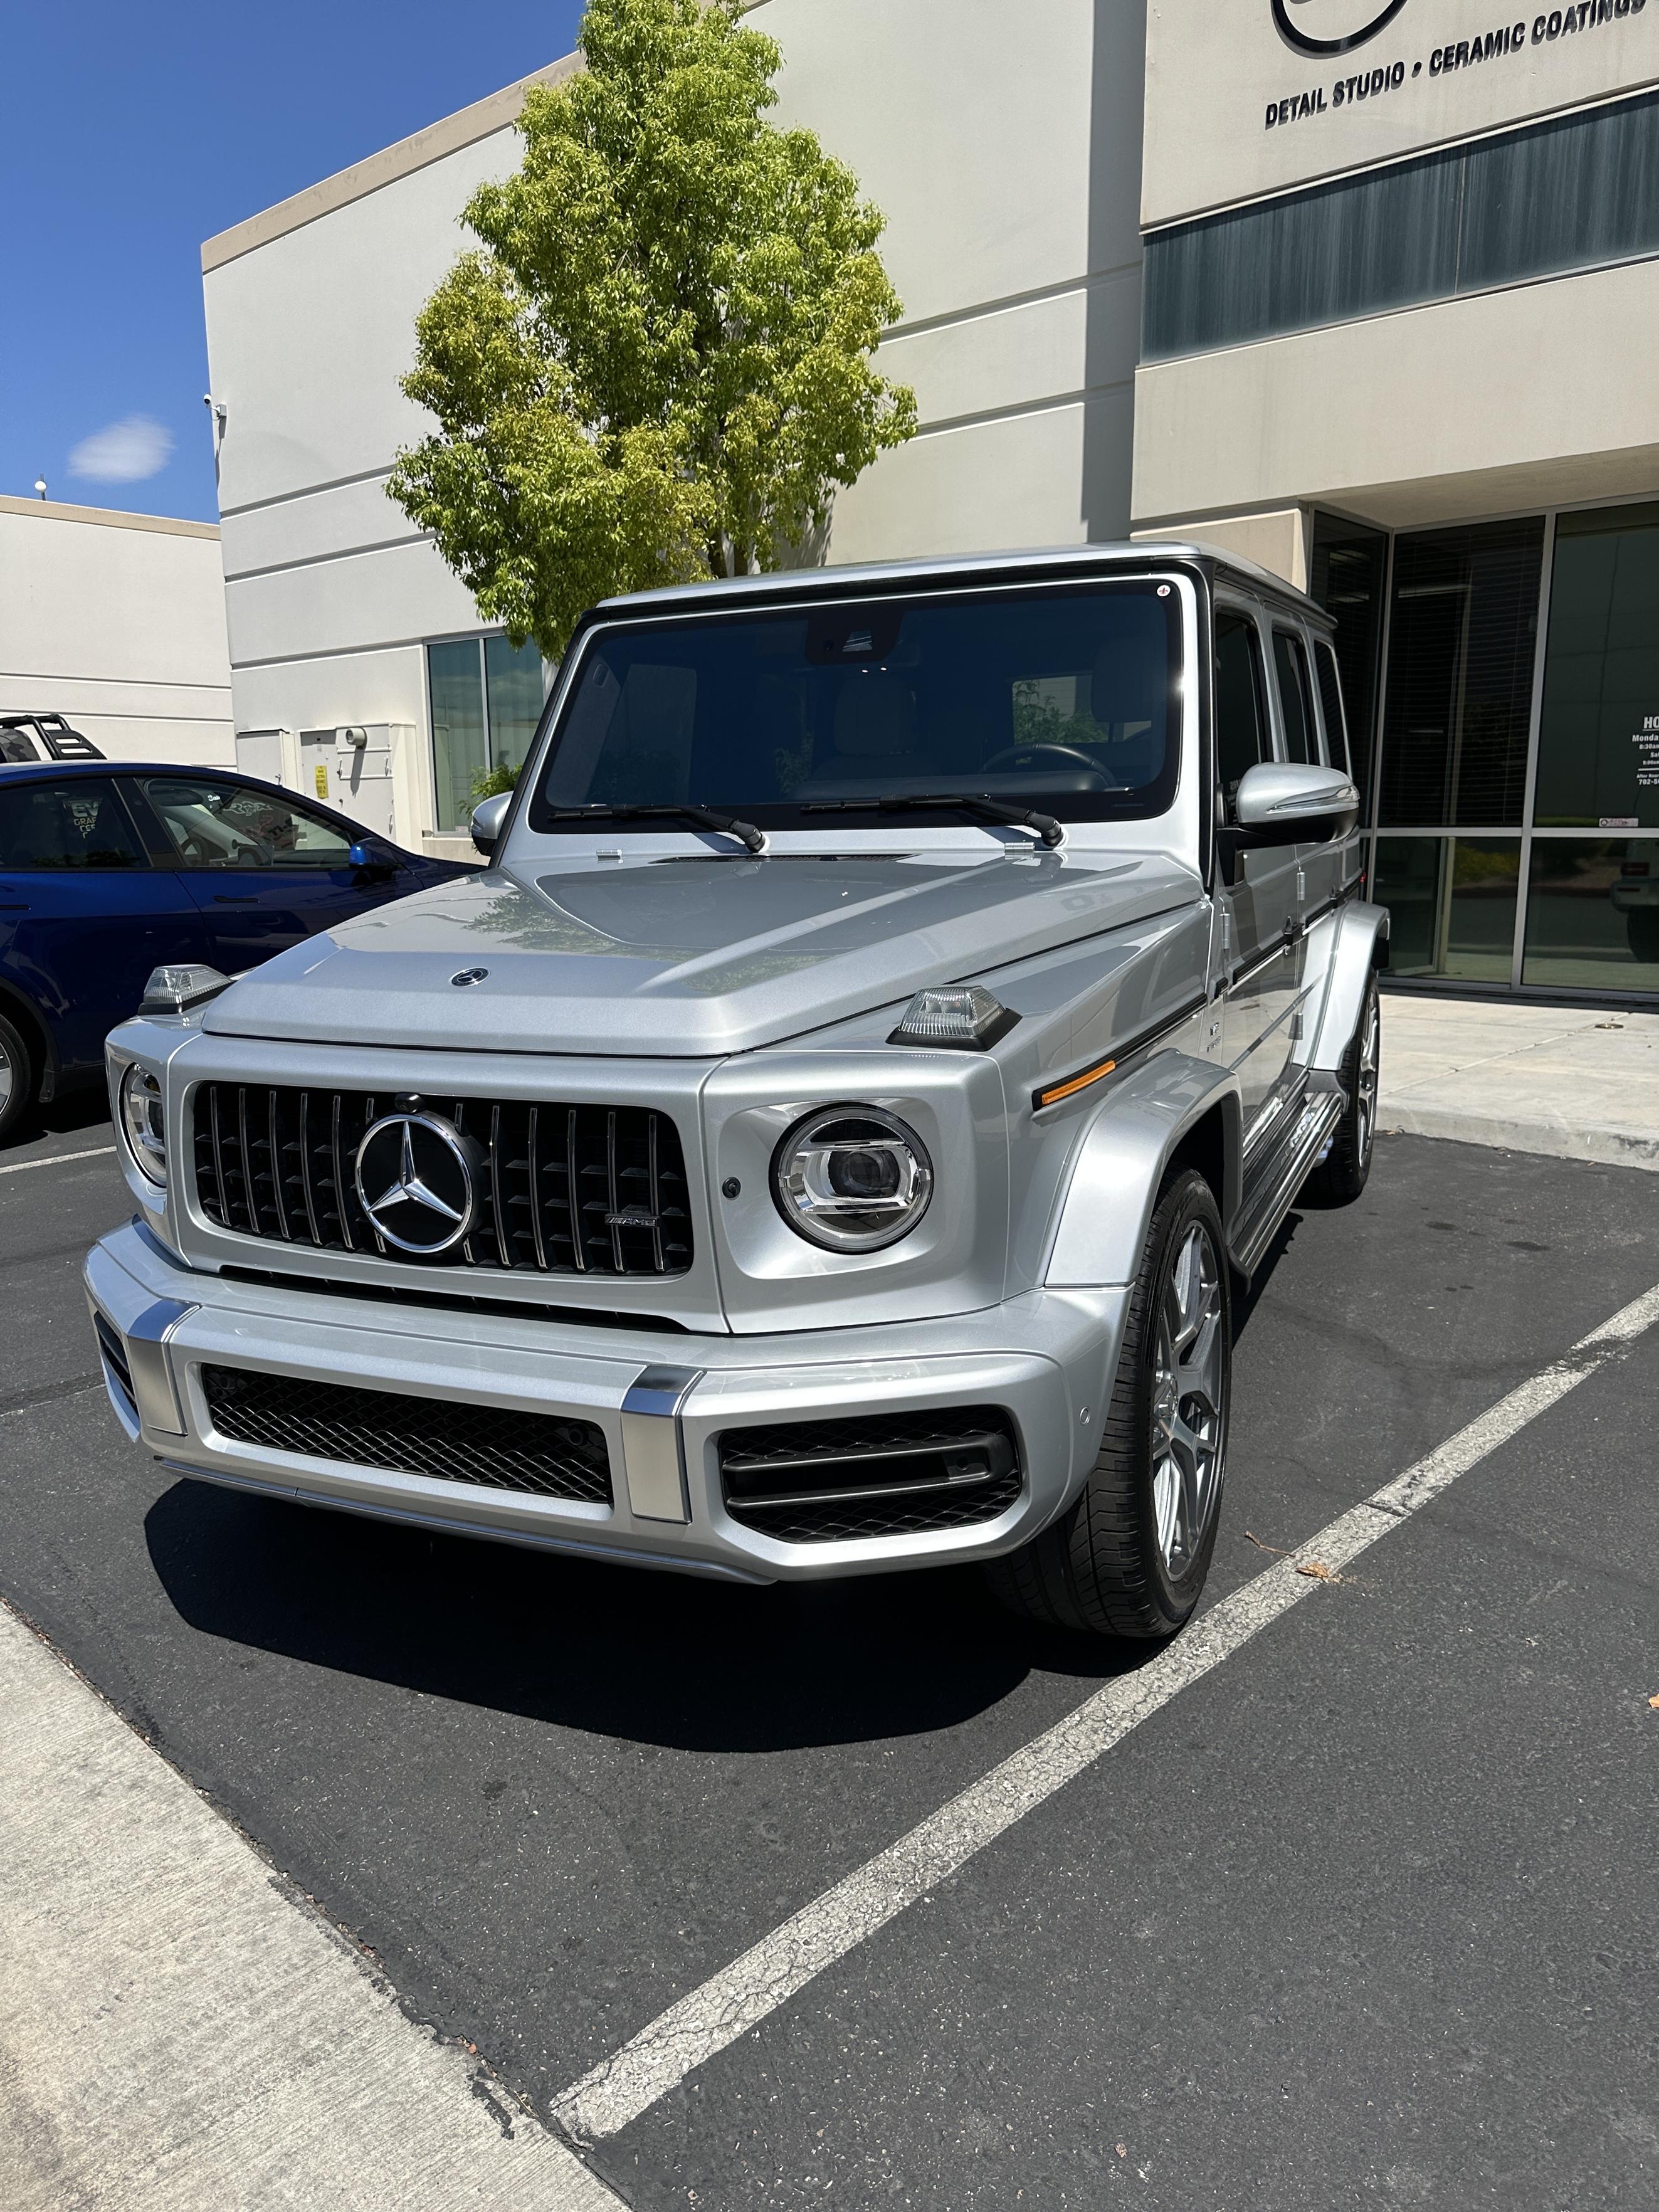 Used Mercedes-Benz G-Class for Sale in Las Vegas, NV